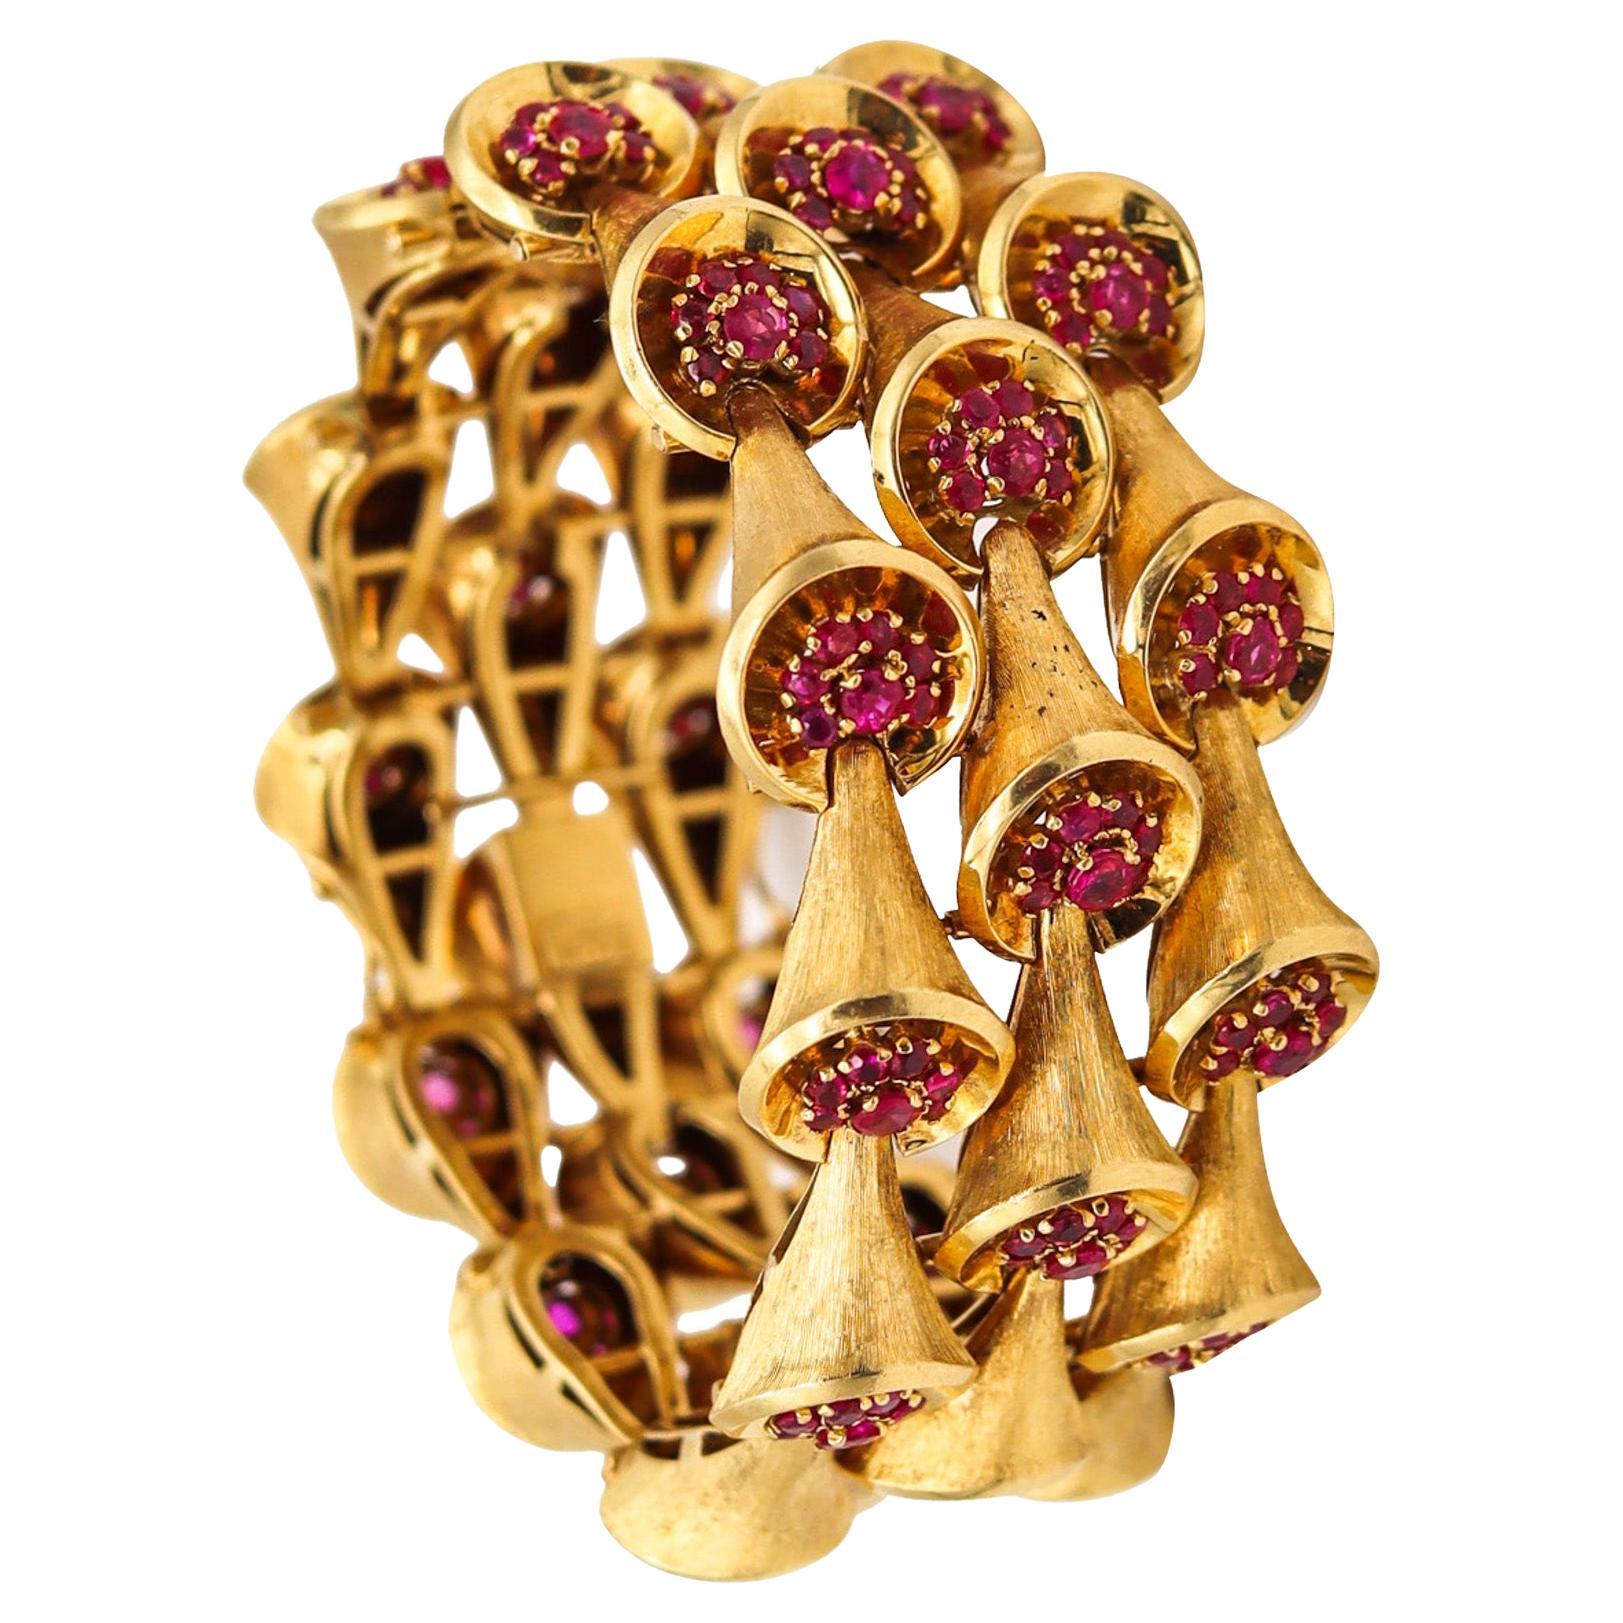 Shreve & Co. 1950 Bangle Bracelet in 18kt Gold with 14.85ct in Burmese Rubies For Sale